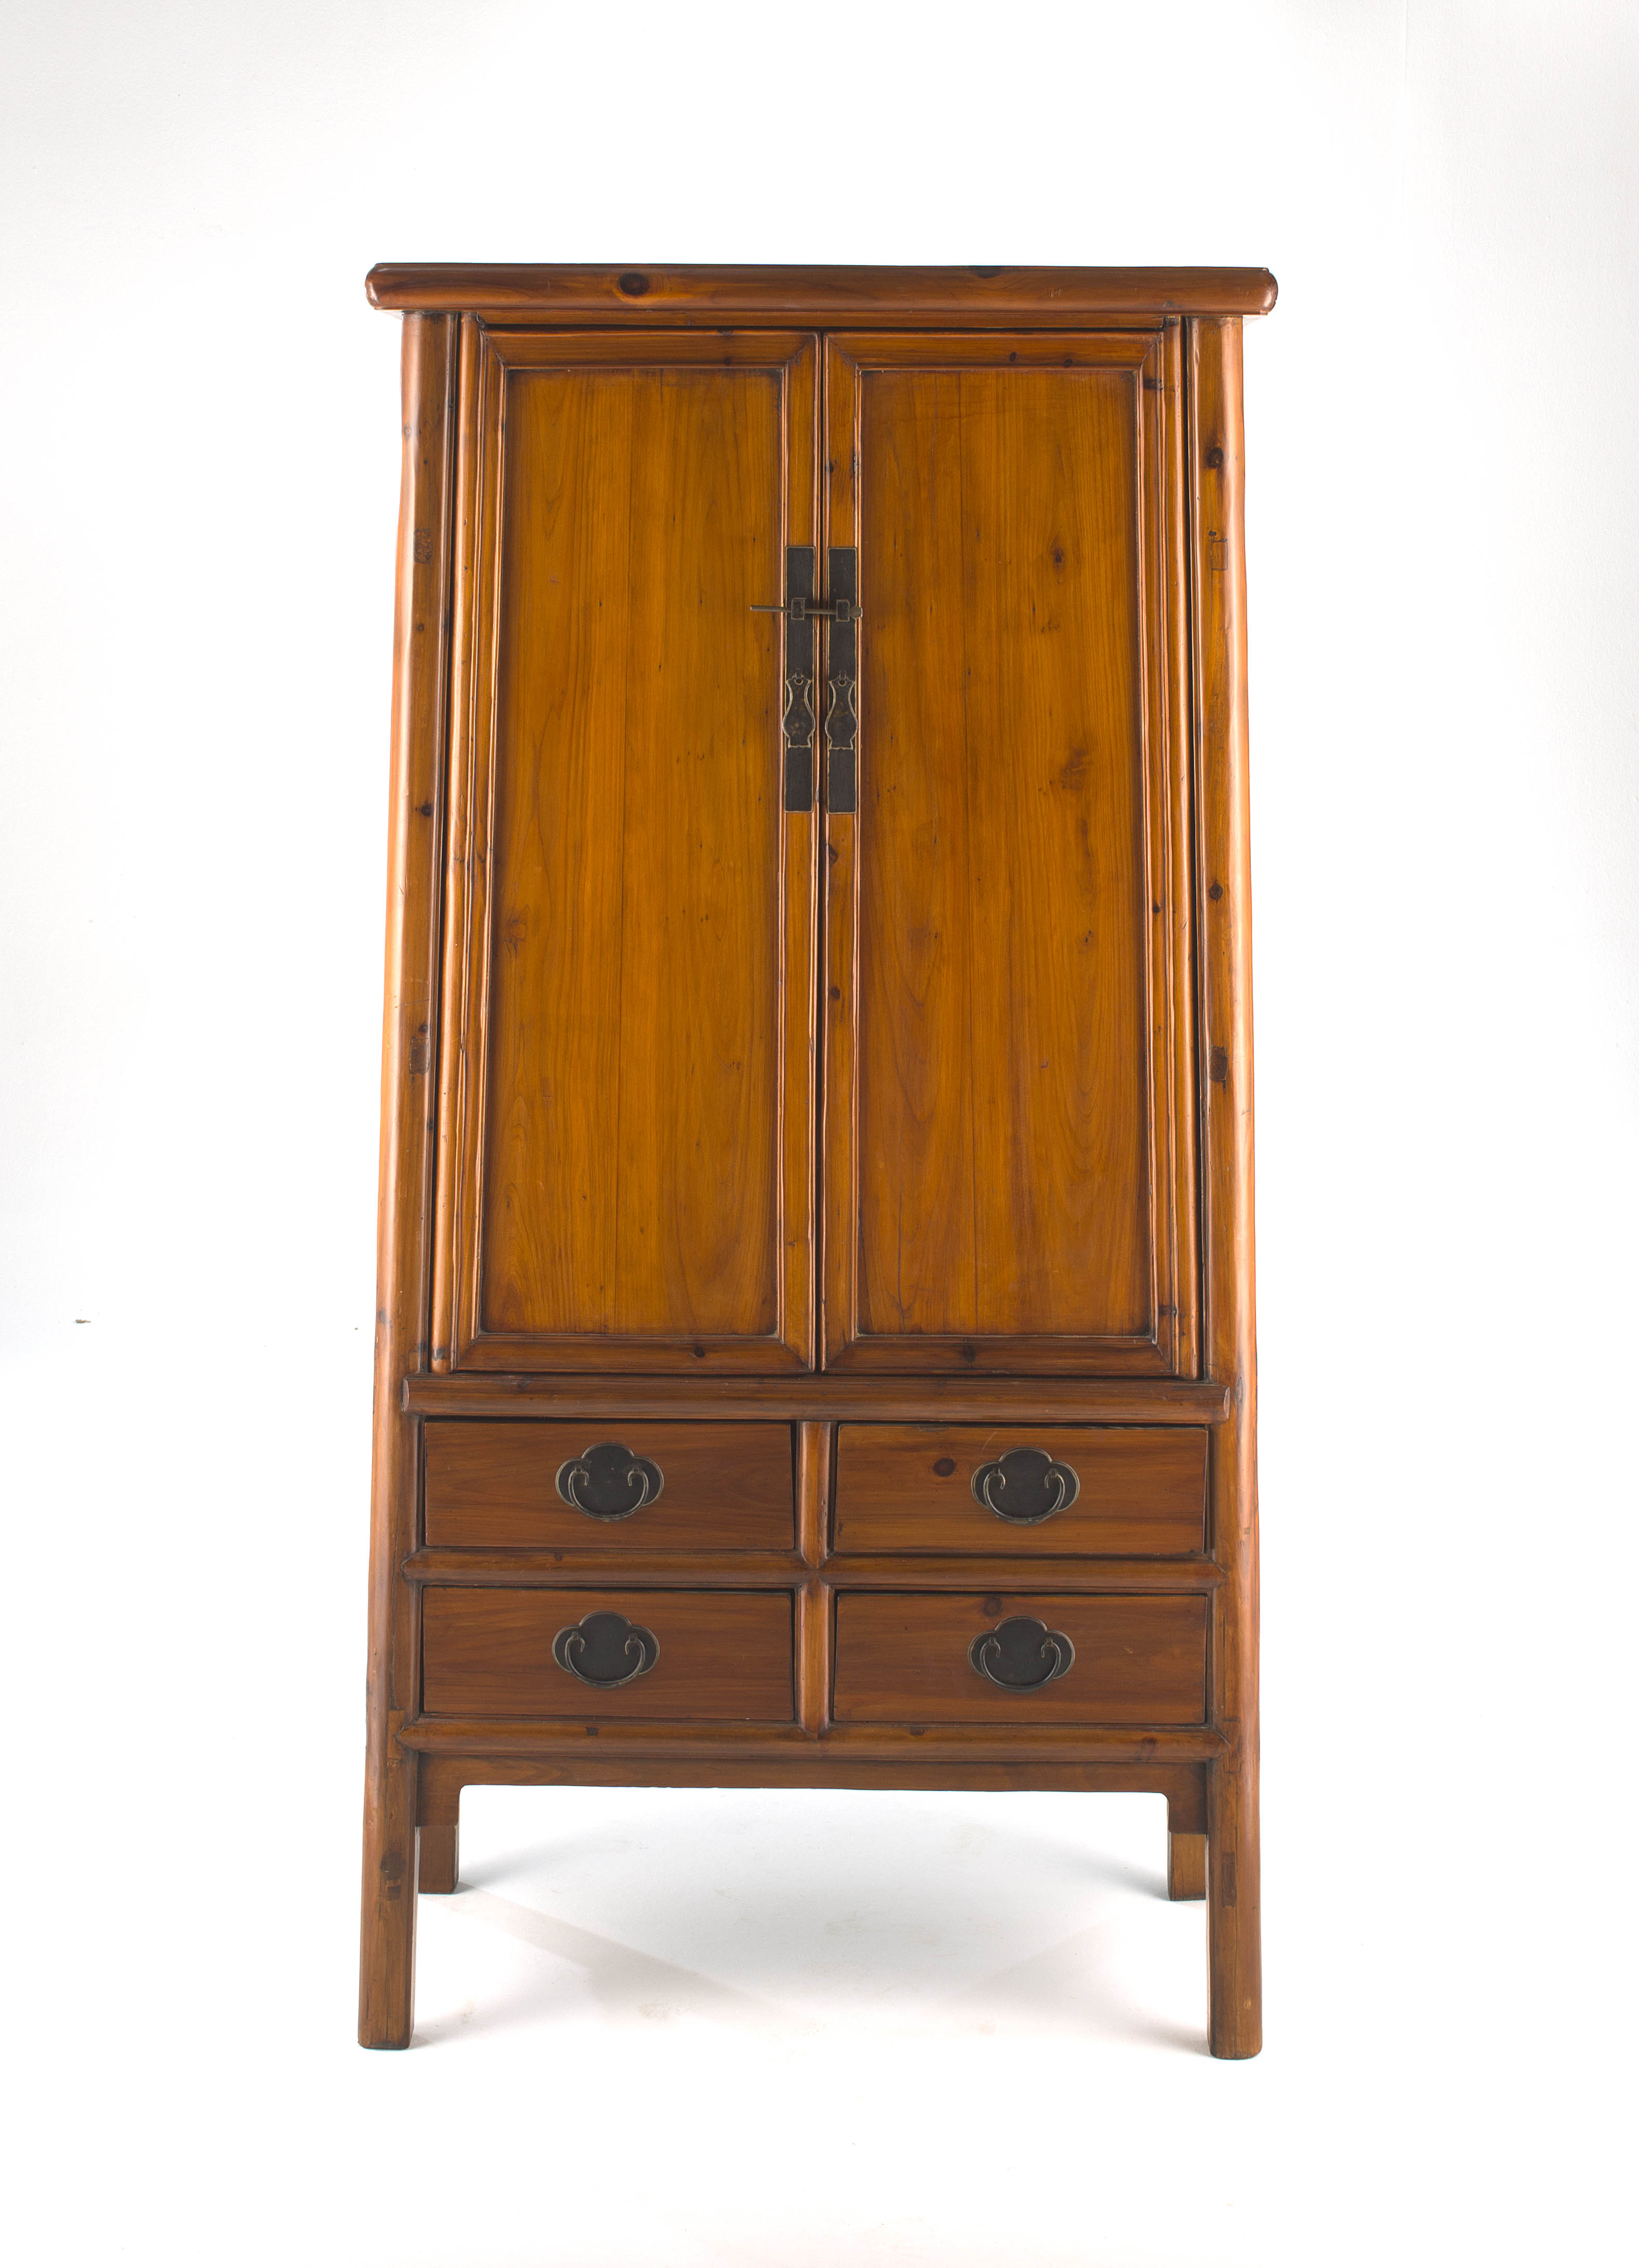 A Chinese provincial fruitwood cupboard, late 19th century